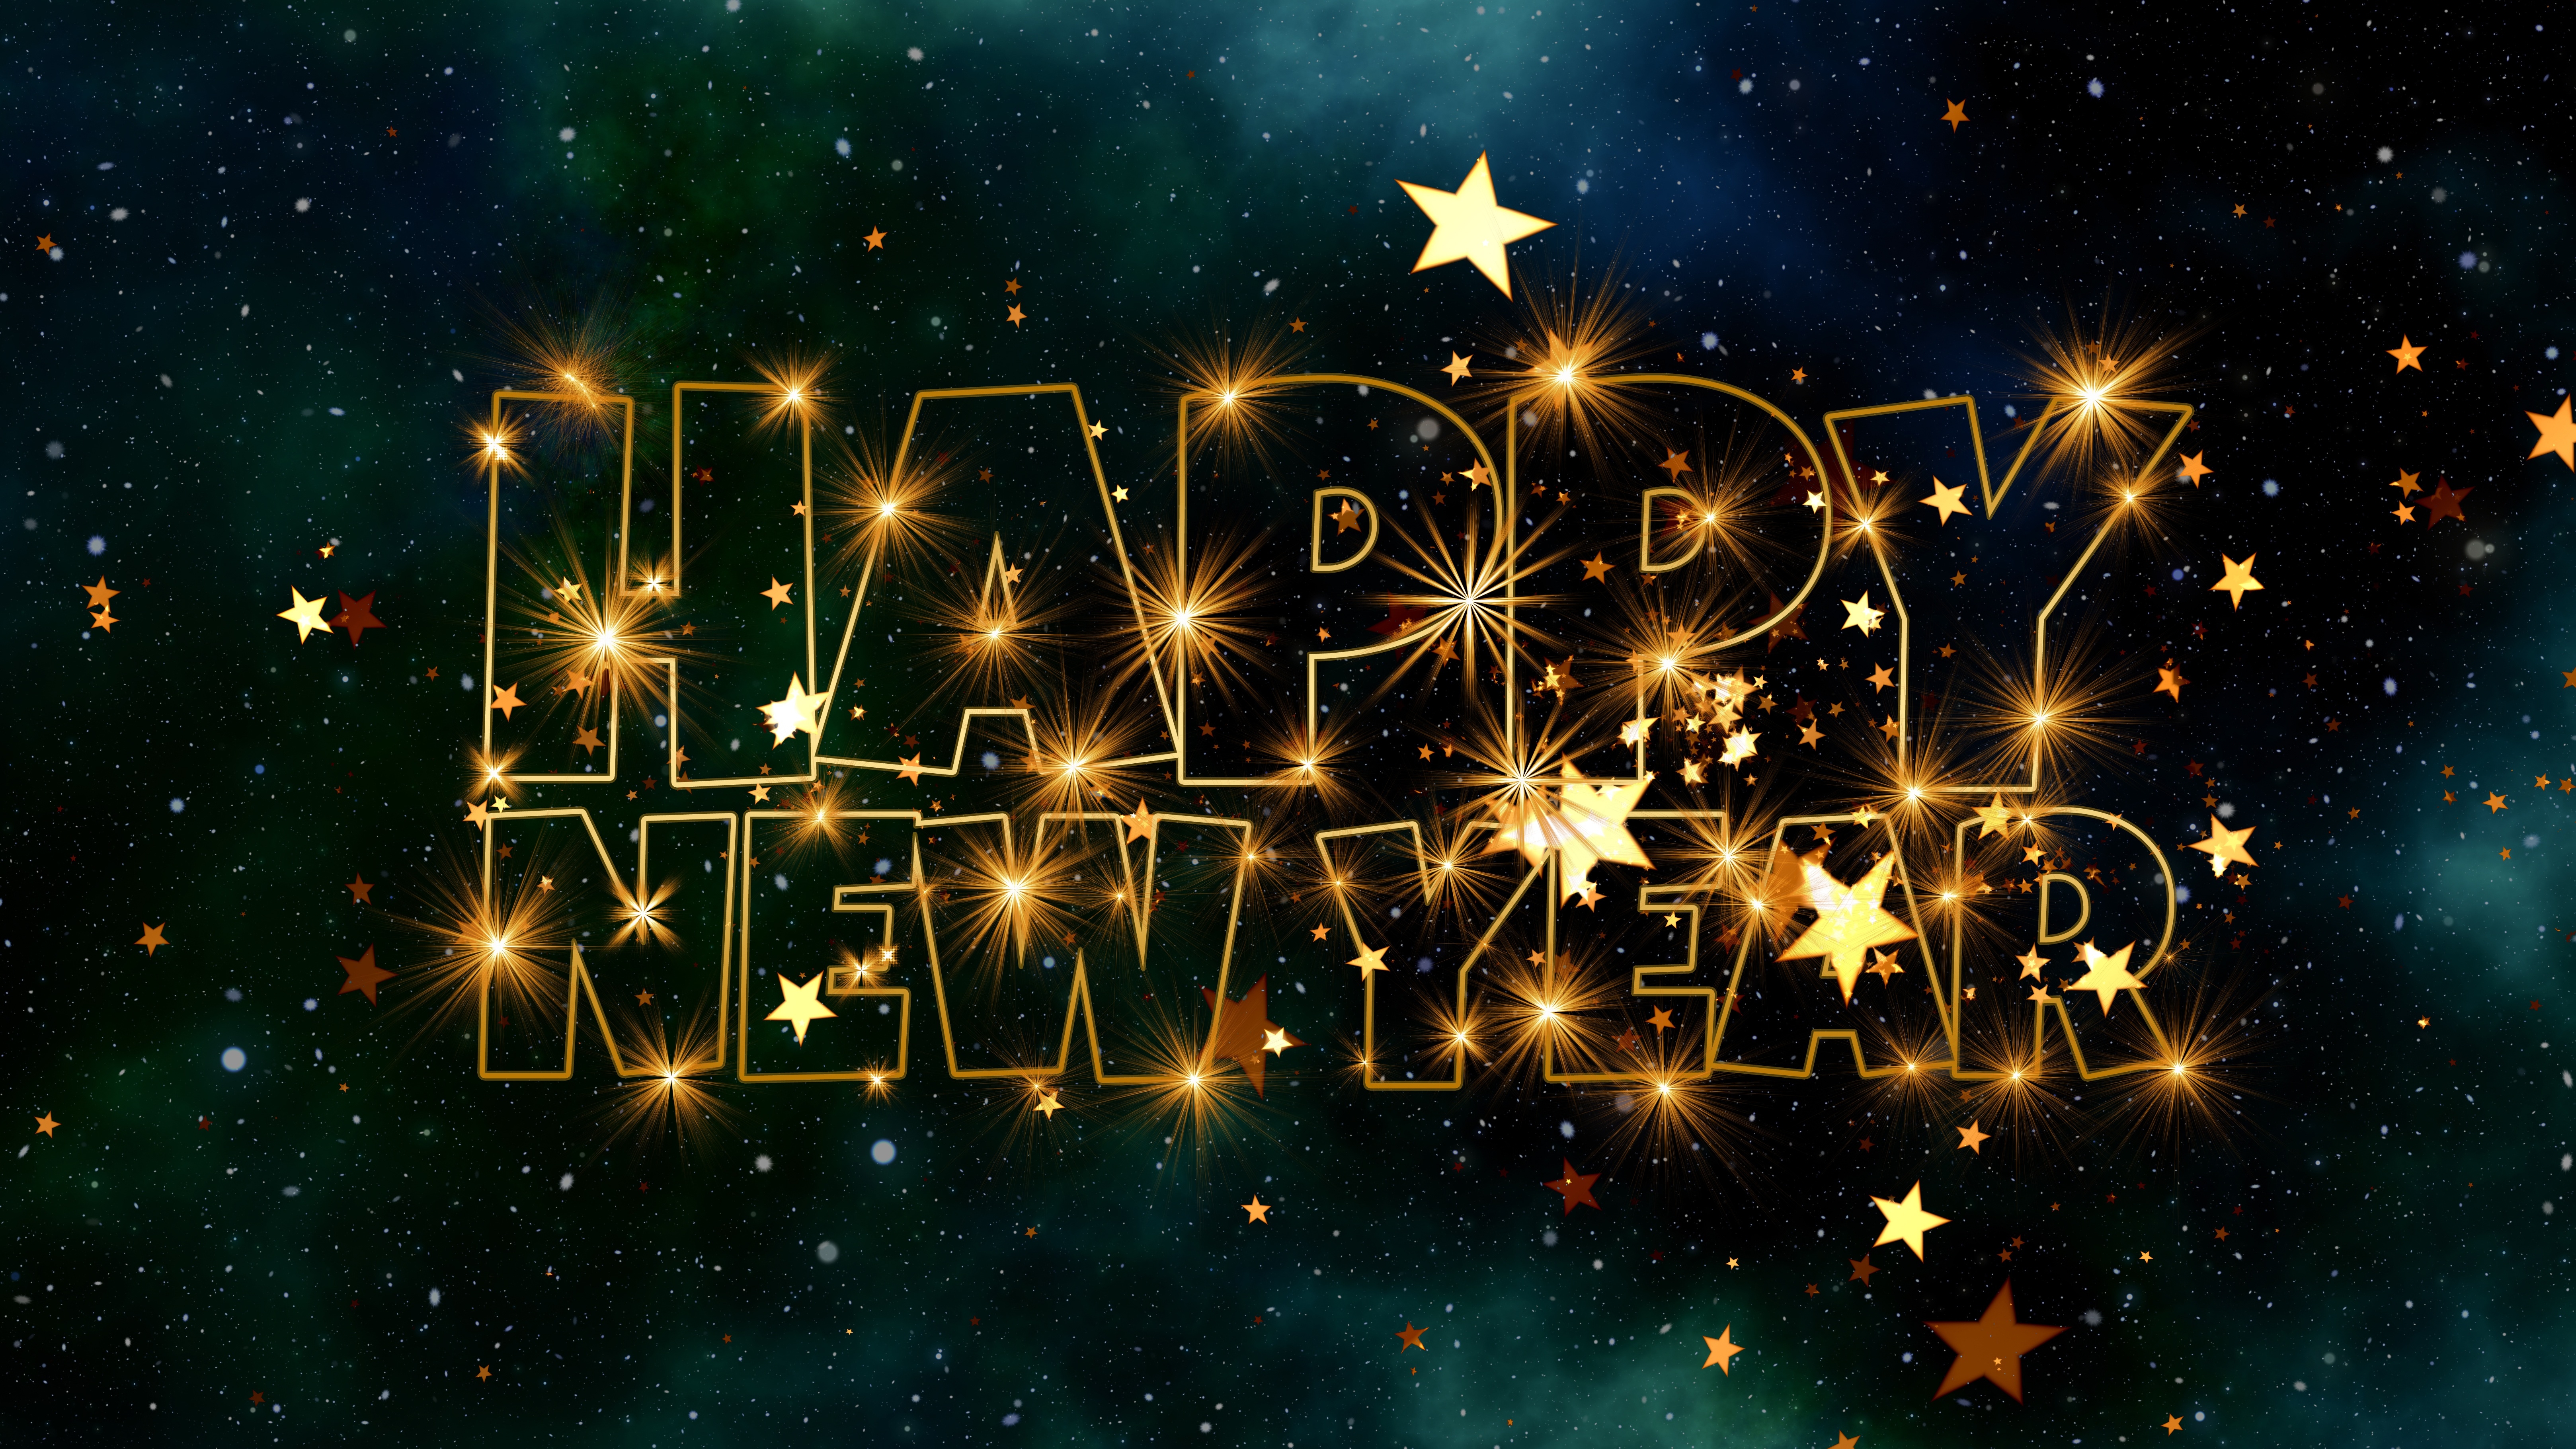 HD wallpaper, 5K, Girly Backgrounds, Stars, Happy New Year